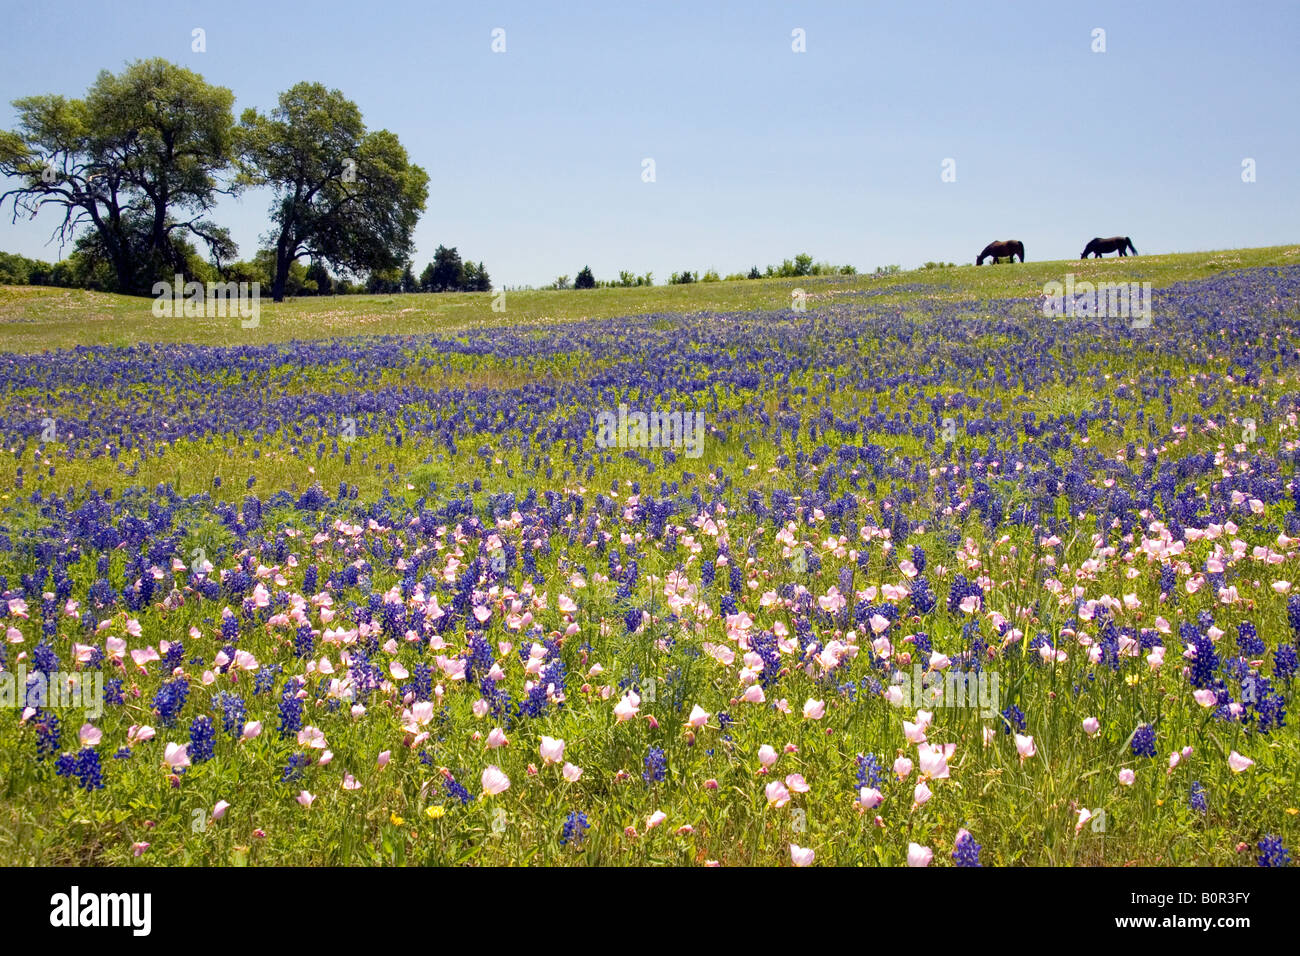 Horse graze in a field of Bluebonnet and Pink Evening Primrose wildflowers in Washington County Texas Stock Photo